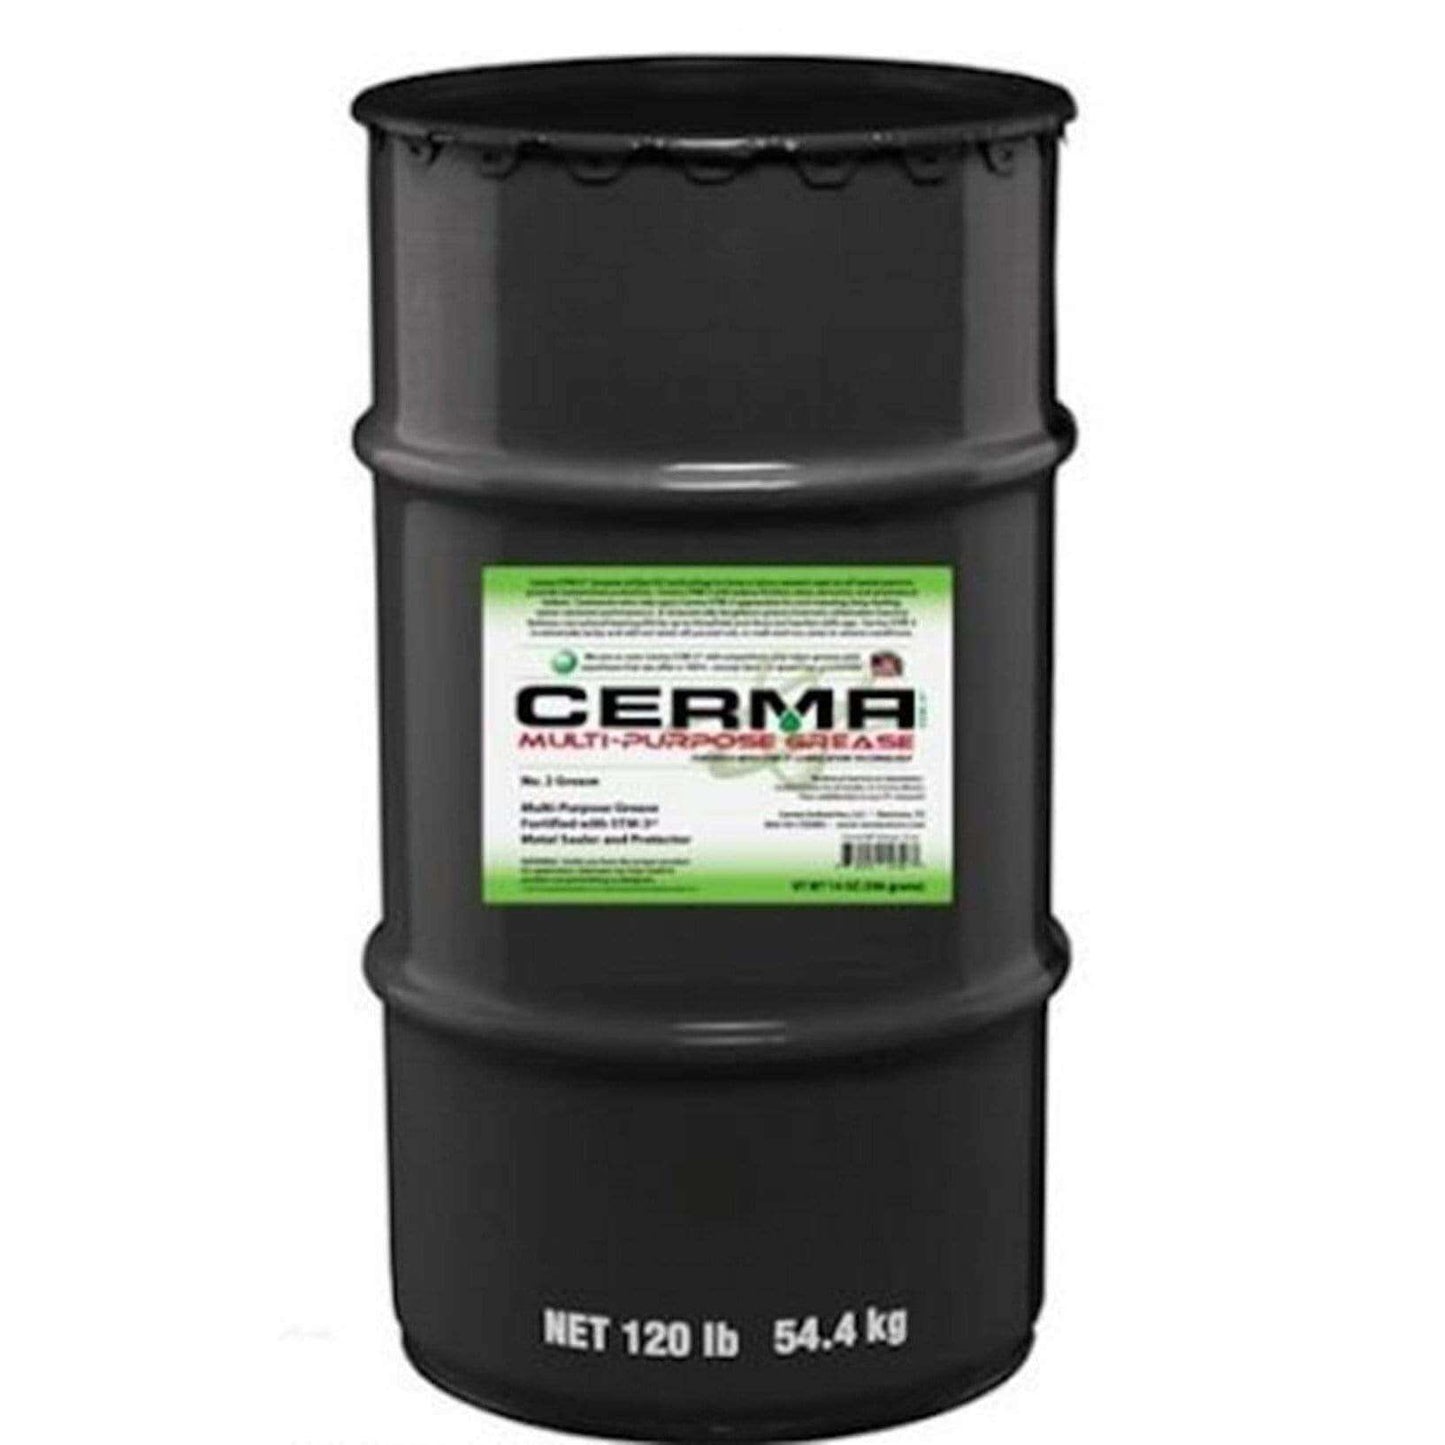 Cerma Ceramic Multi Purpose Grease at $1016.2 only from cermatreatment.com